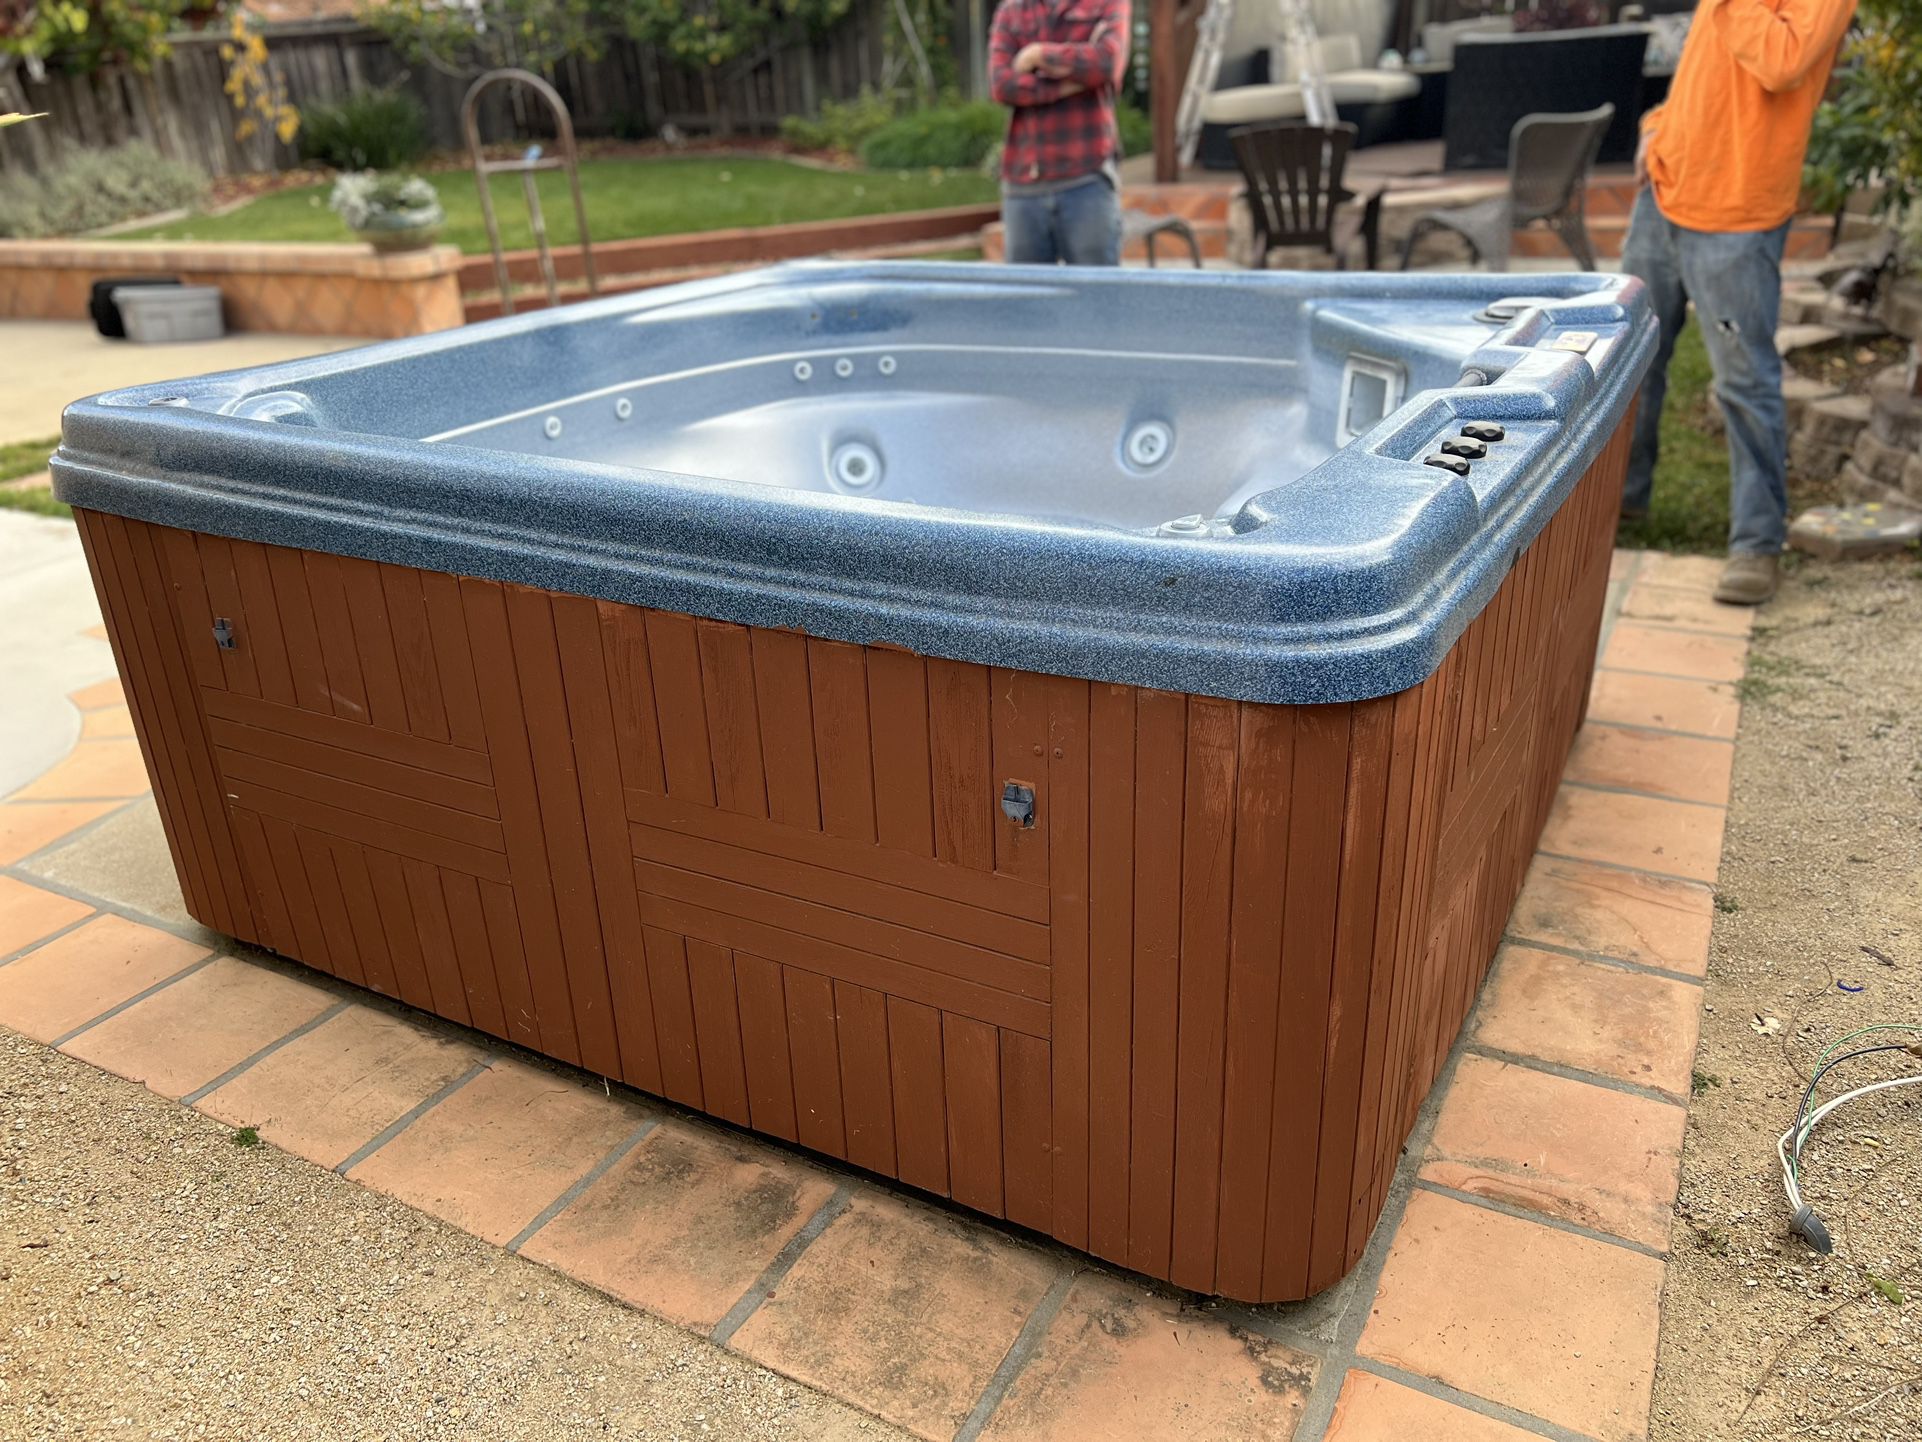 Hot Tub Spa Ready Trades For Quads Motorcycles Or …?